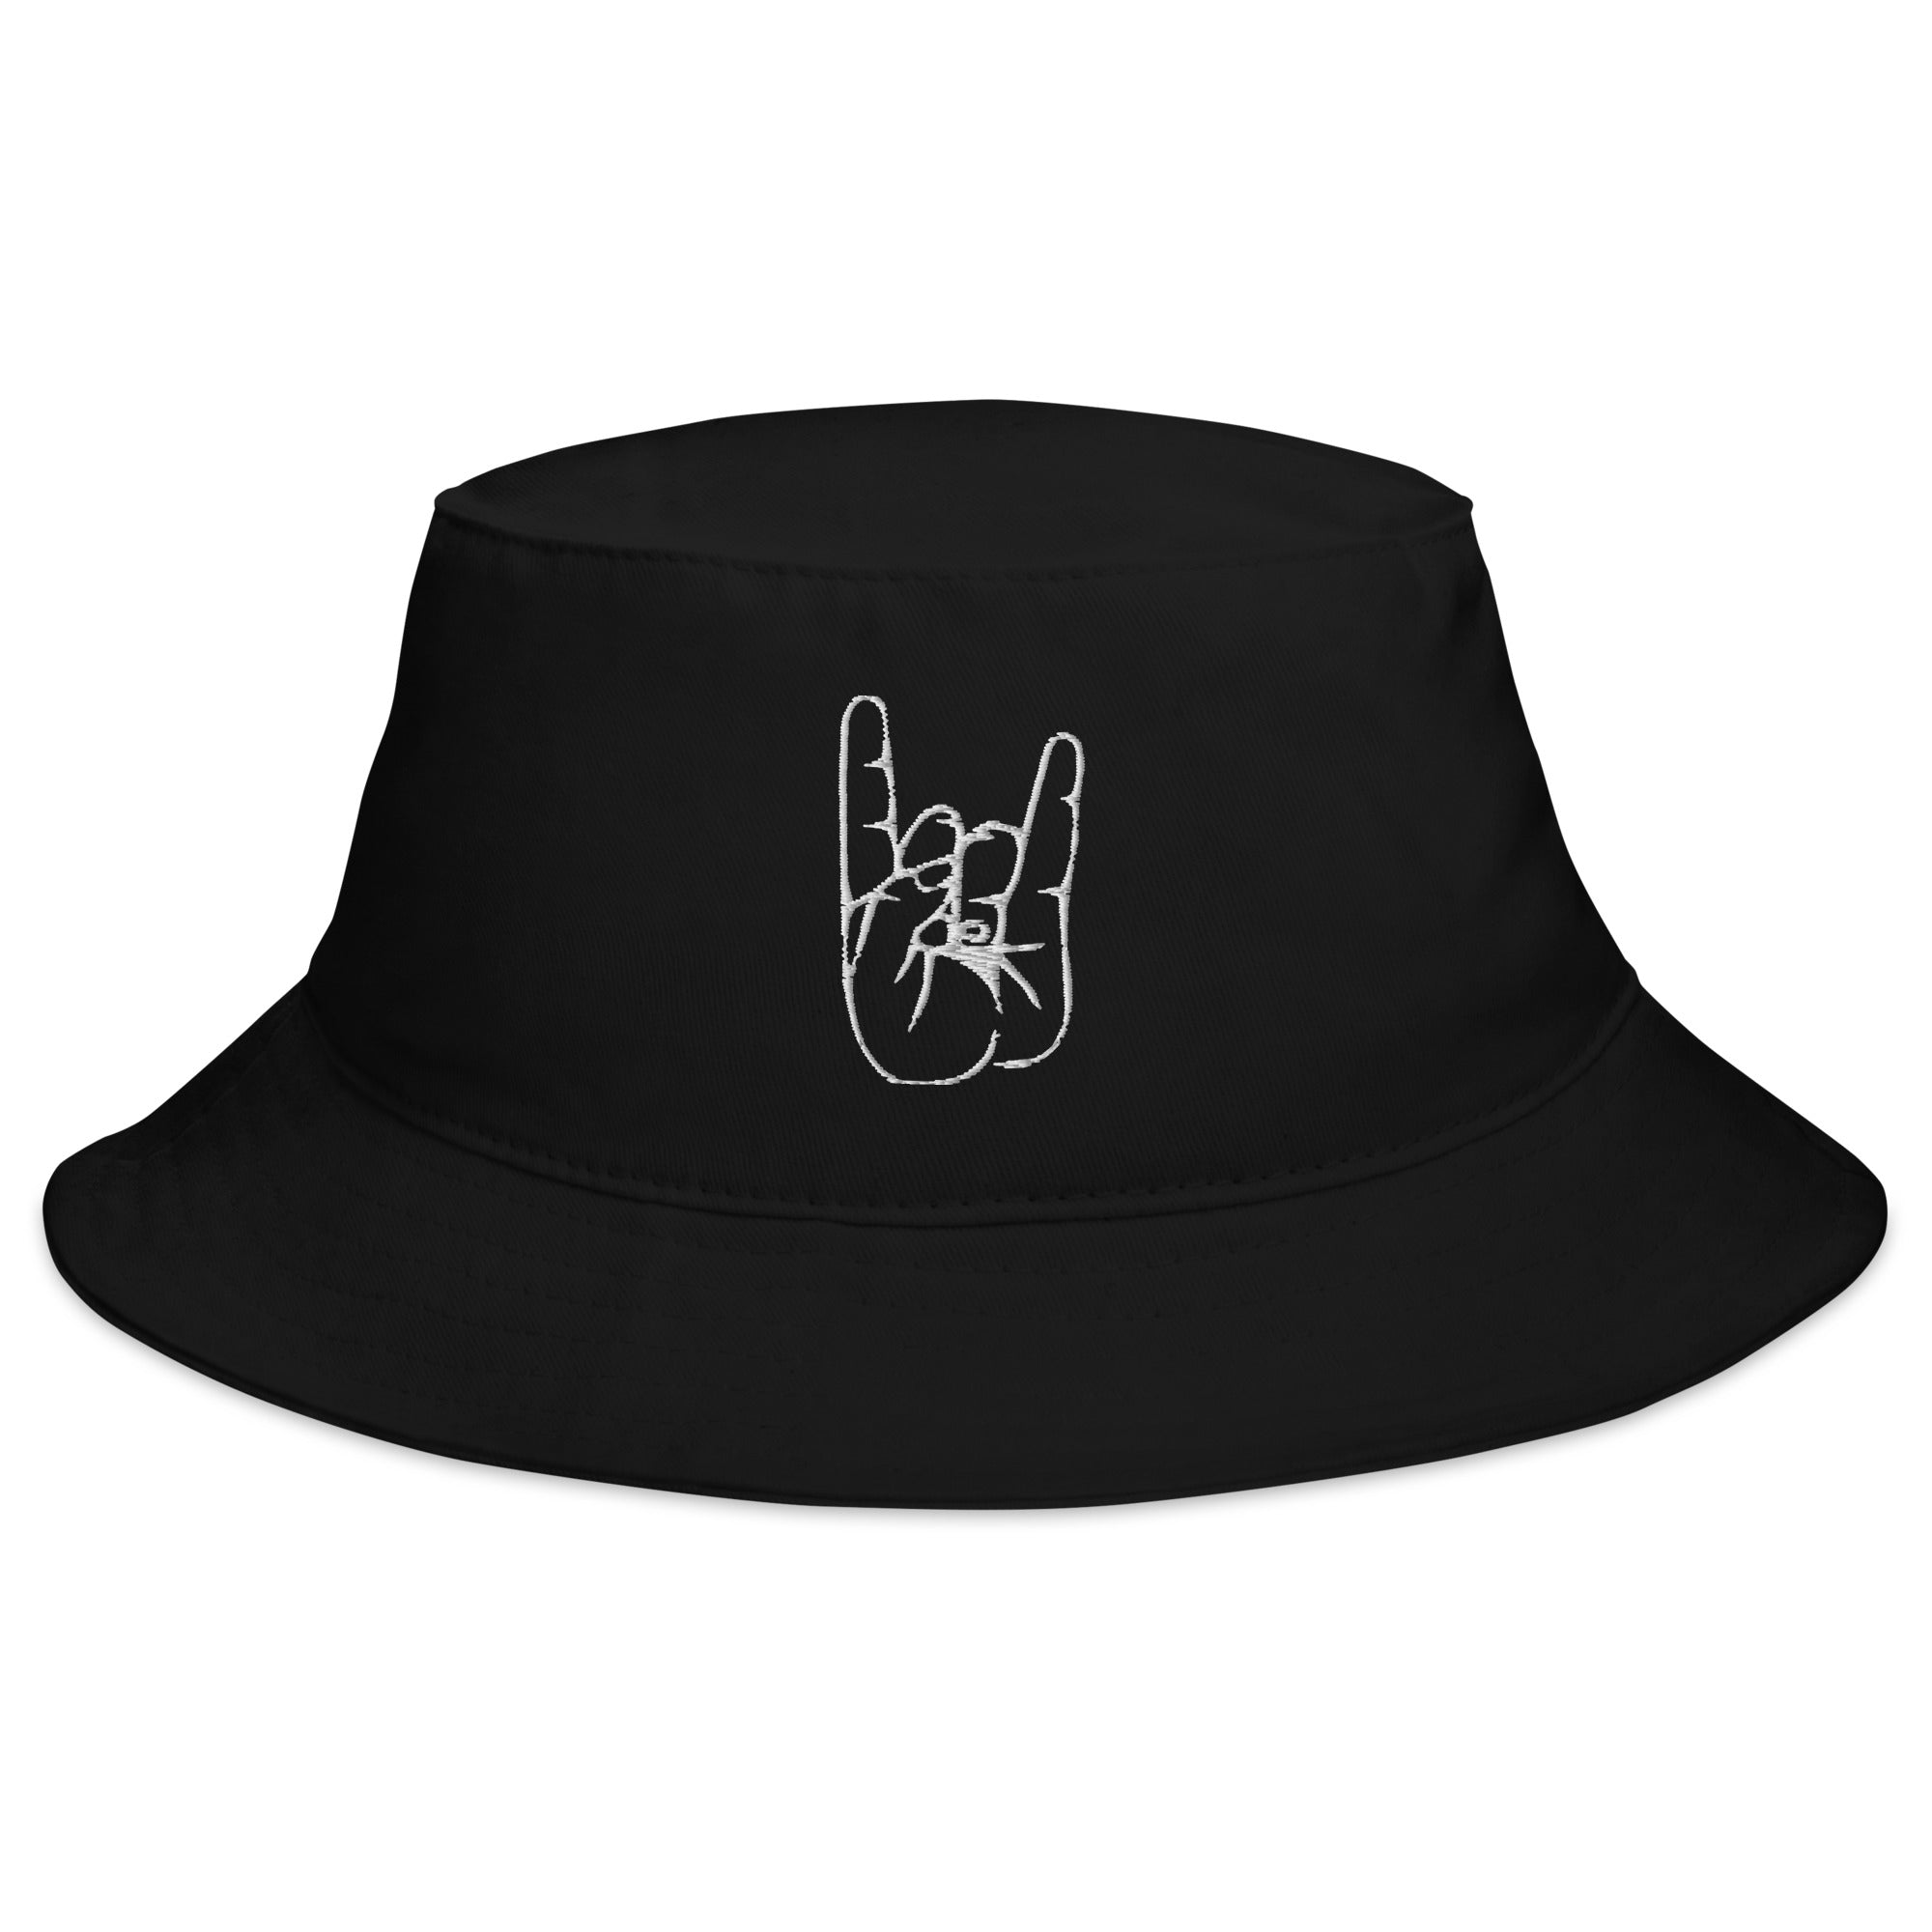 The Sign of the Horns Embroidered Bucket Hat Heavy Metal Devil Horns